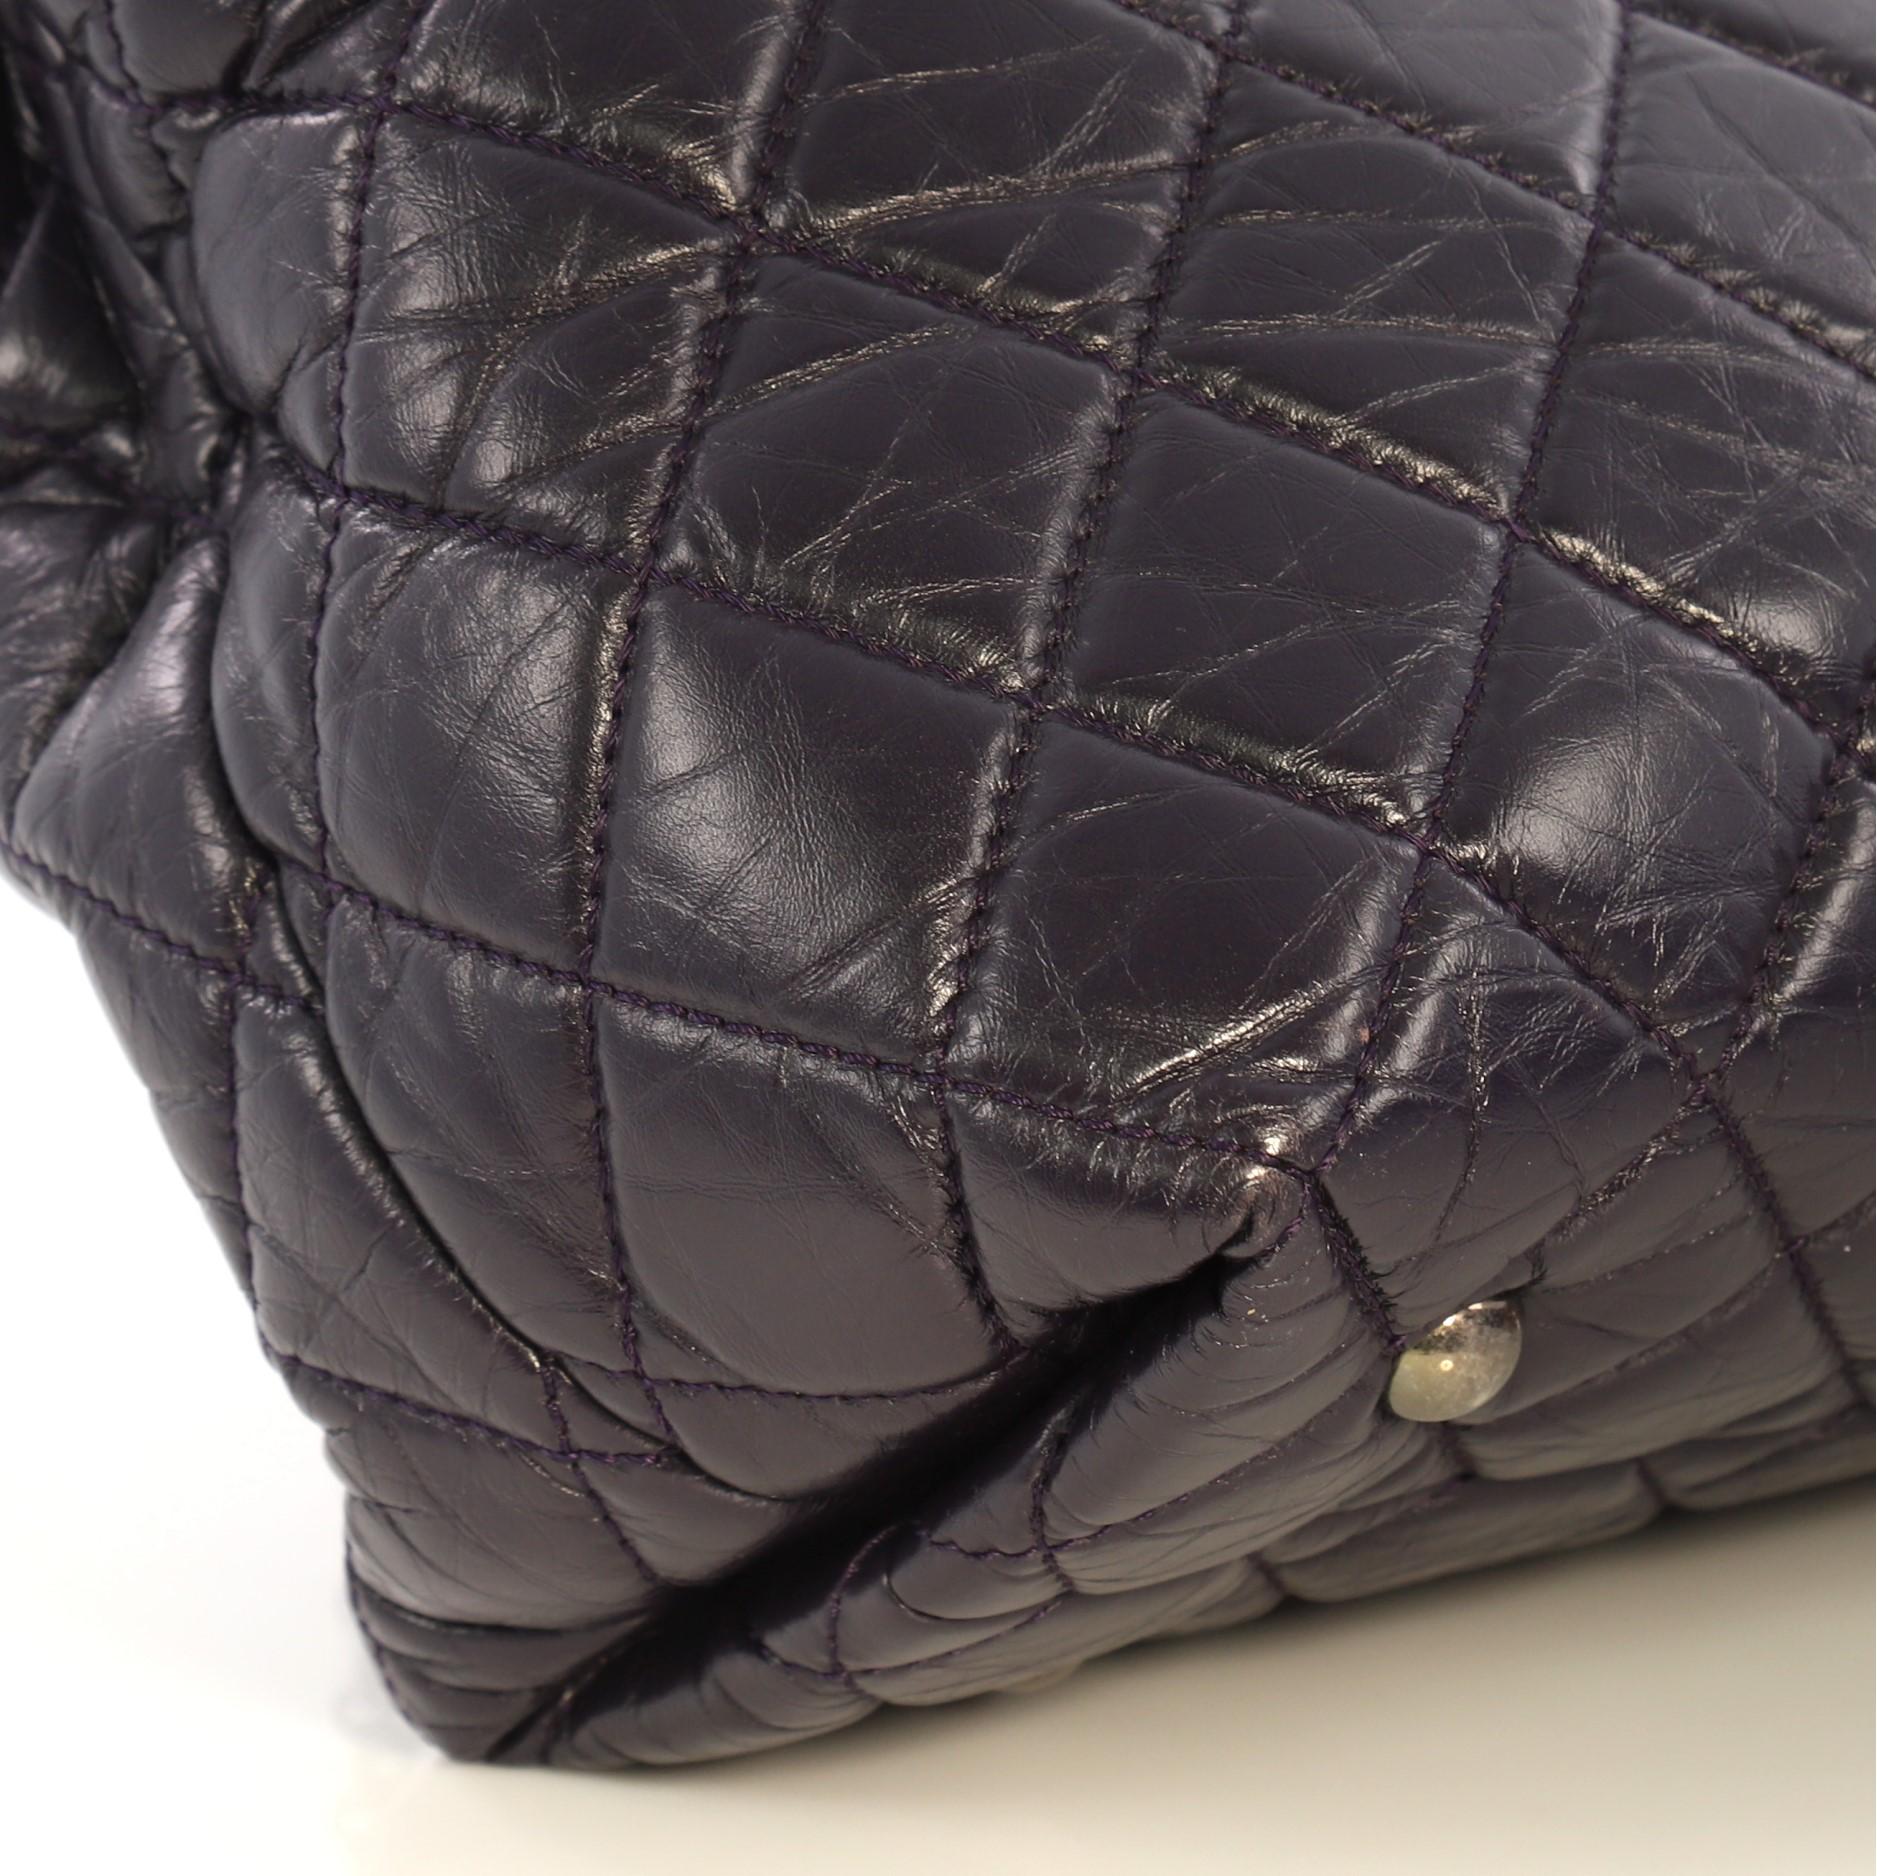 Women's Chanel Reissue Tote Quilted Aged Calfskin Large